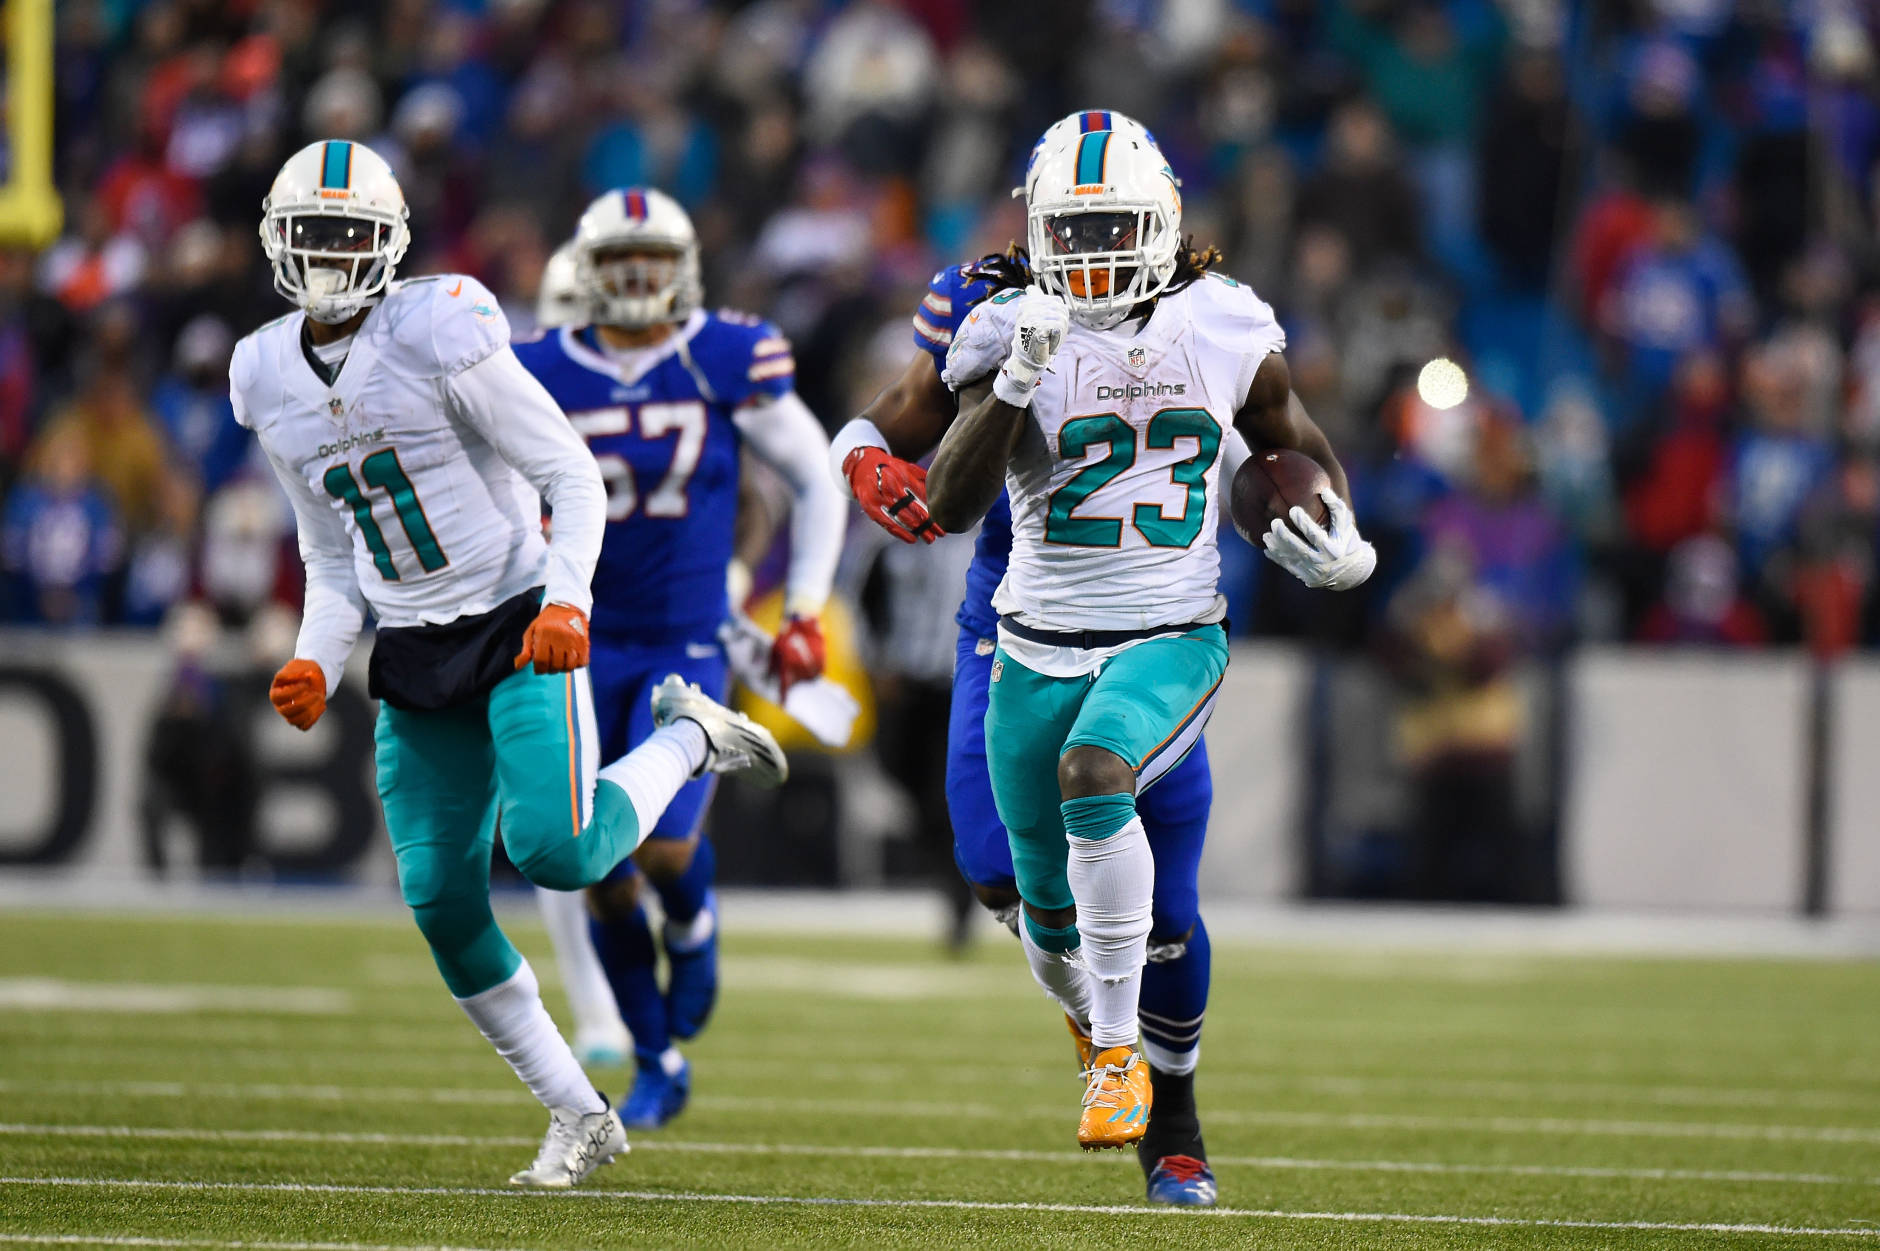 ORCHARD PARK, NY - DECEMBER 24:   Jay Ajayi #23 of the Miami Dolphins runs the ball against the Buffalo Bills during overtime at New Era Stadium on December 24, 2016 in Orchard Park, New York.  (Photo by Rich Barnes/Getty Images)